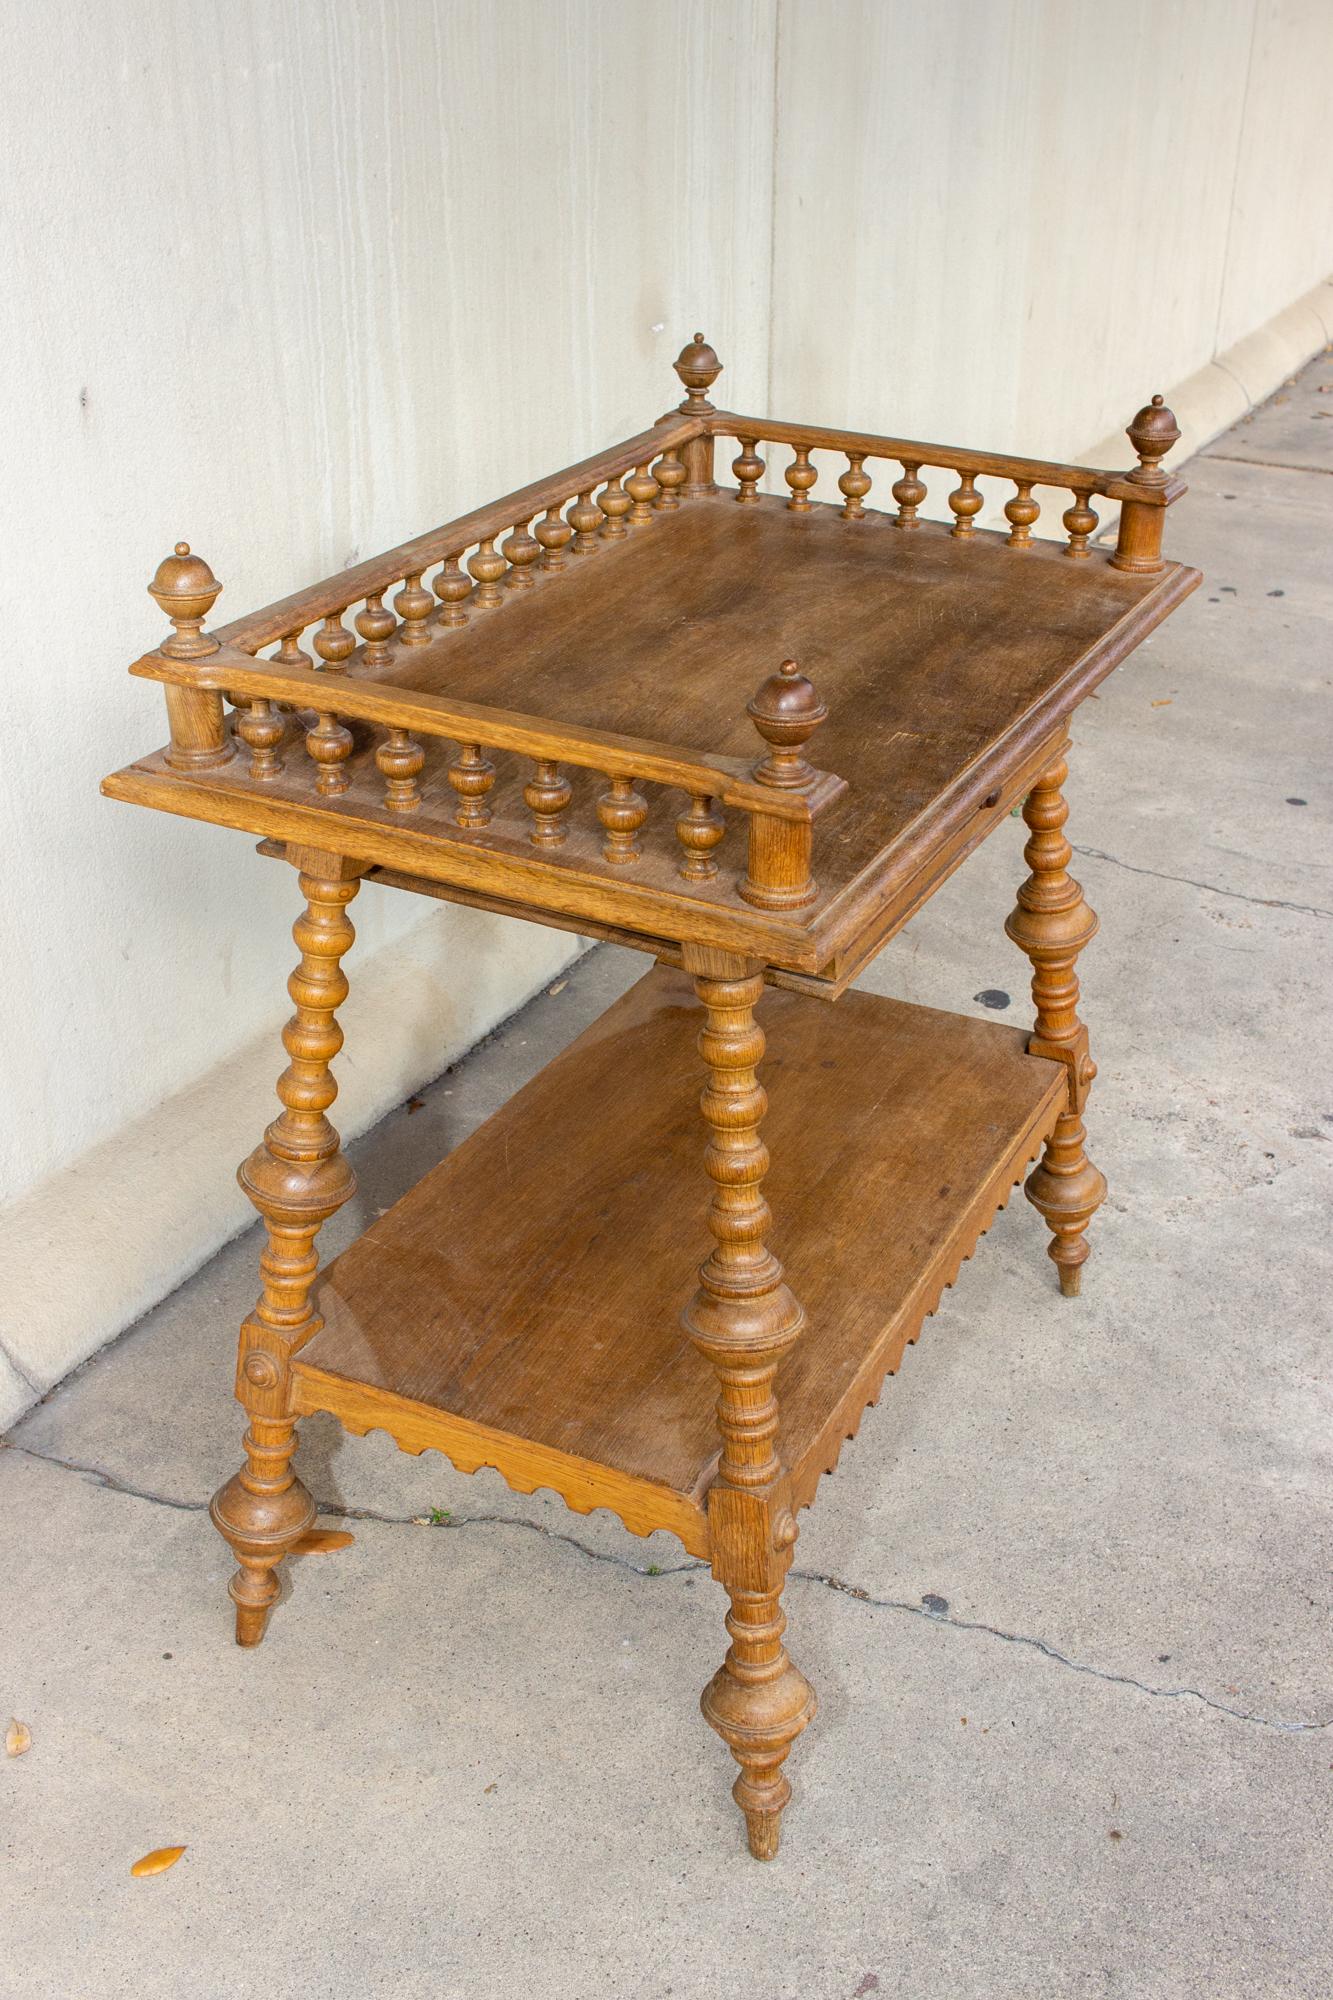 We envision this unique piece of antique French furniture as a bar table. The top tier has a gallery edge with ball-turned details and finials at each corner, and a drawer with dove-tail construction attached below. The lower shelf has a beautifully